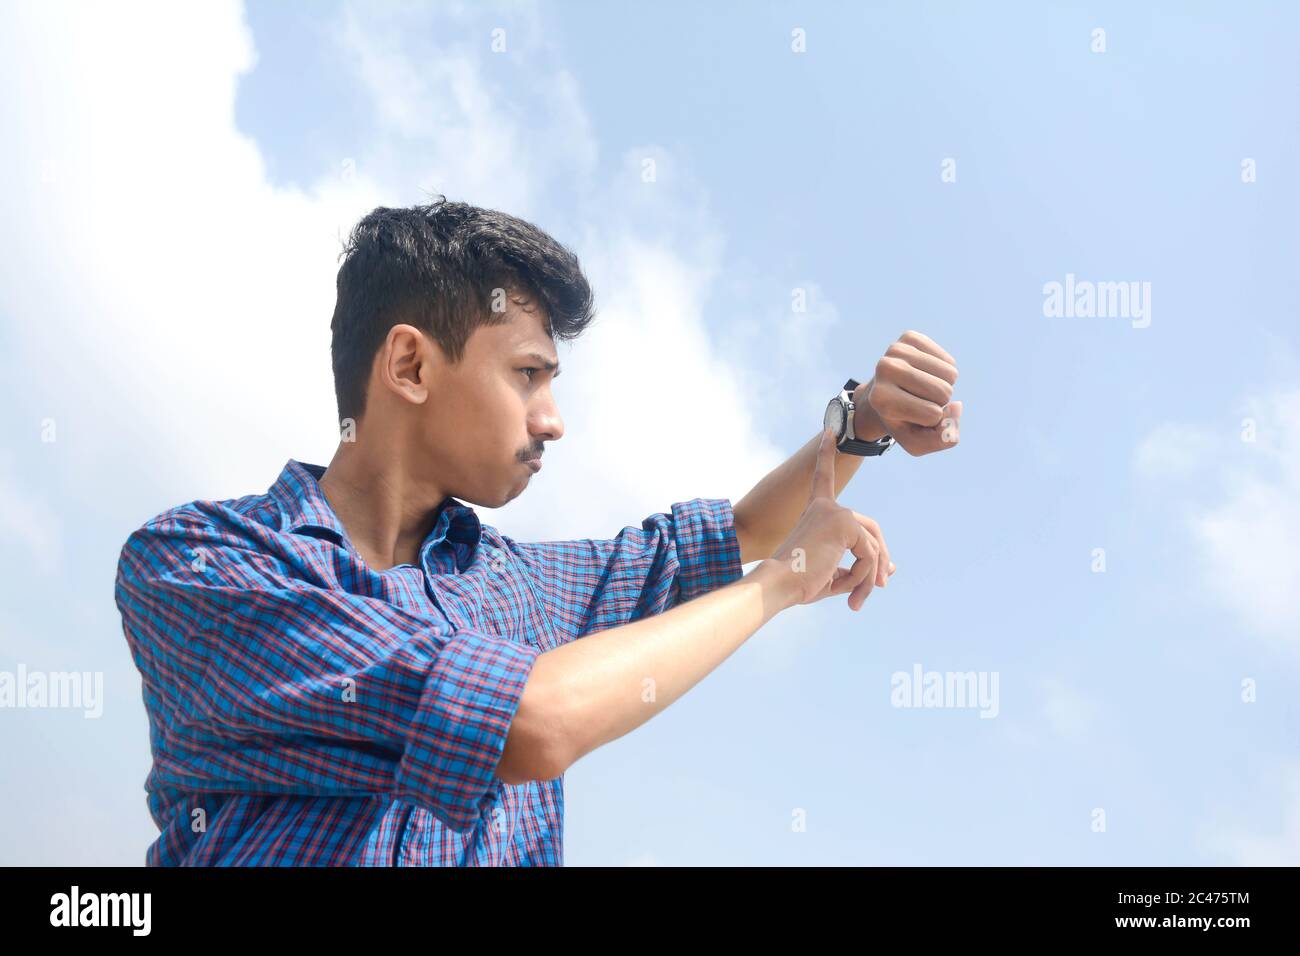 Portrait of young man looking at his watch. isolated on sky background. Stock Photo